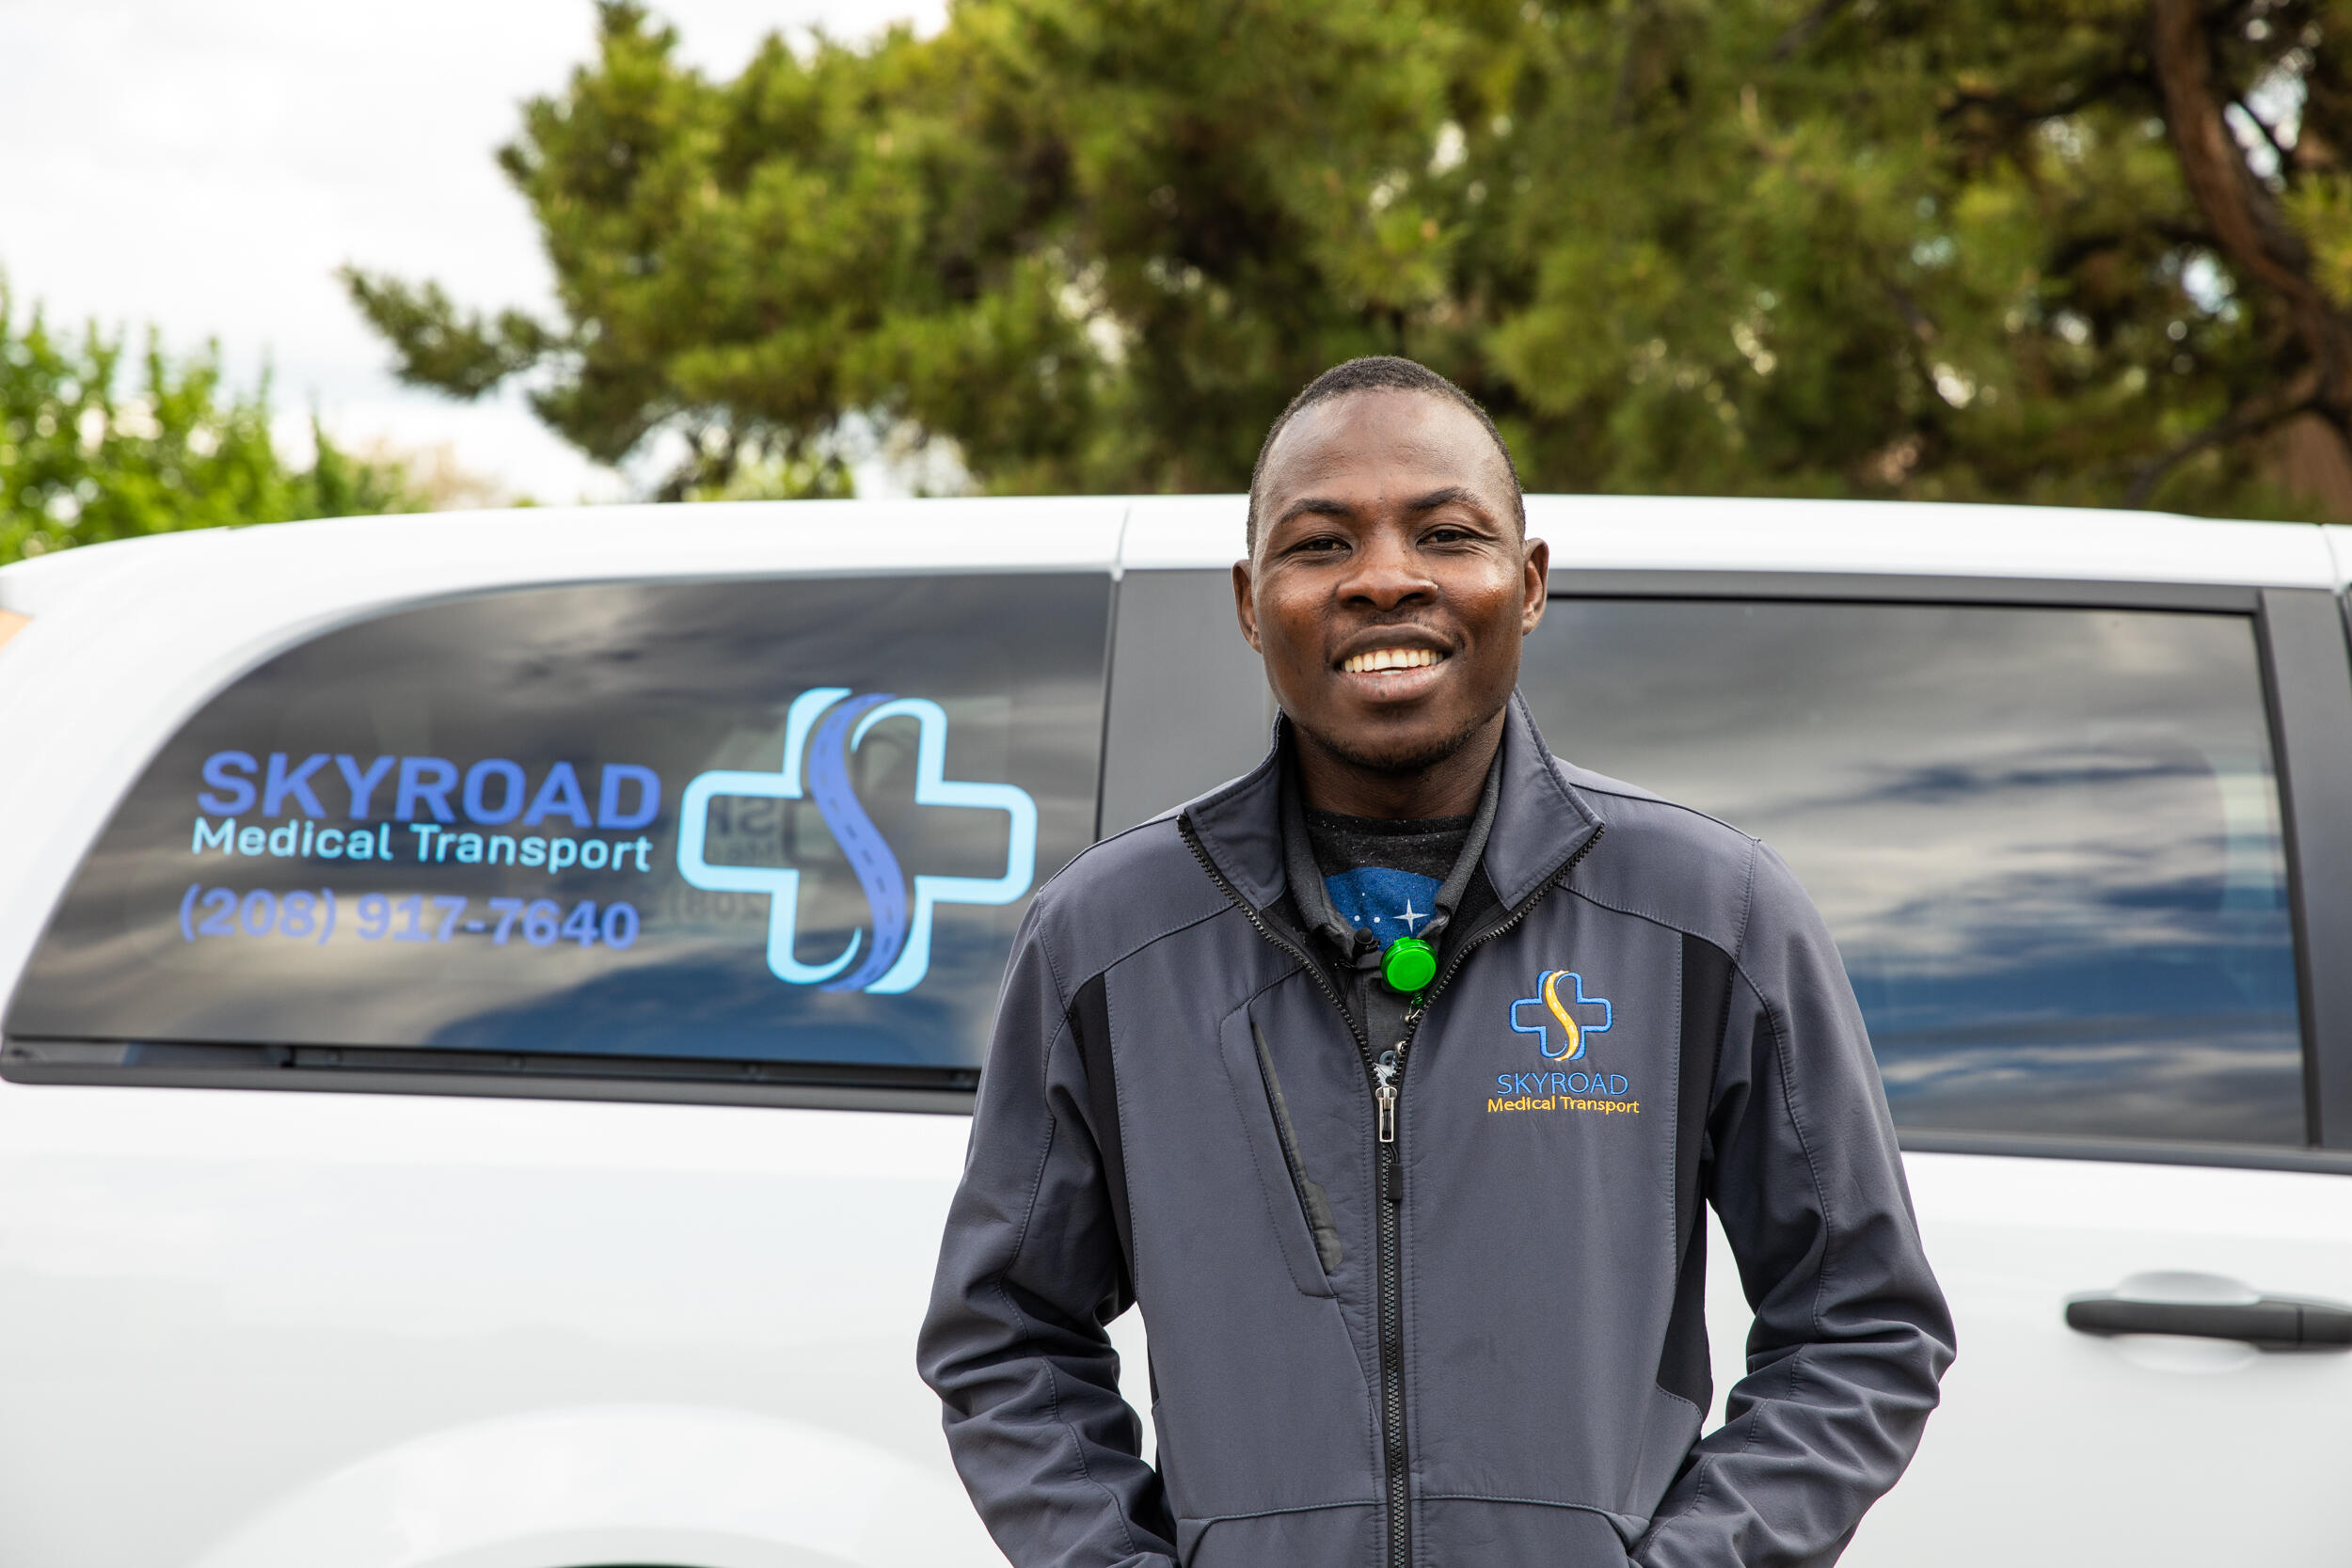 Jonathan Amissa stands in front of a van this is part of his company's fleet of medical transport vehicles.